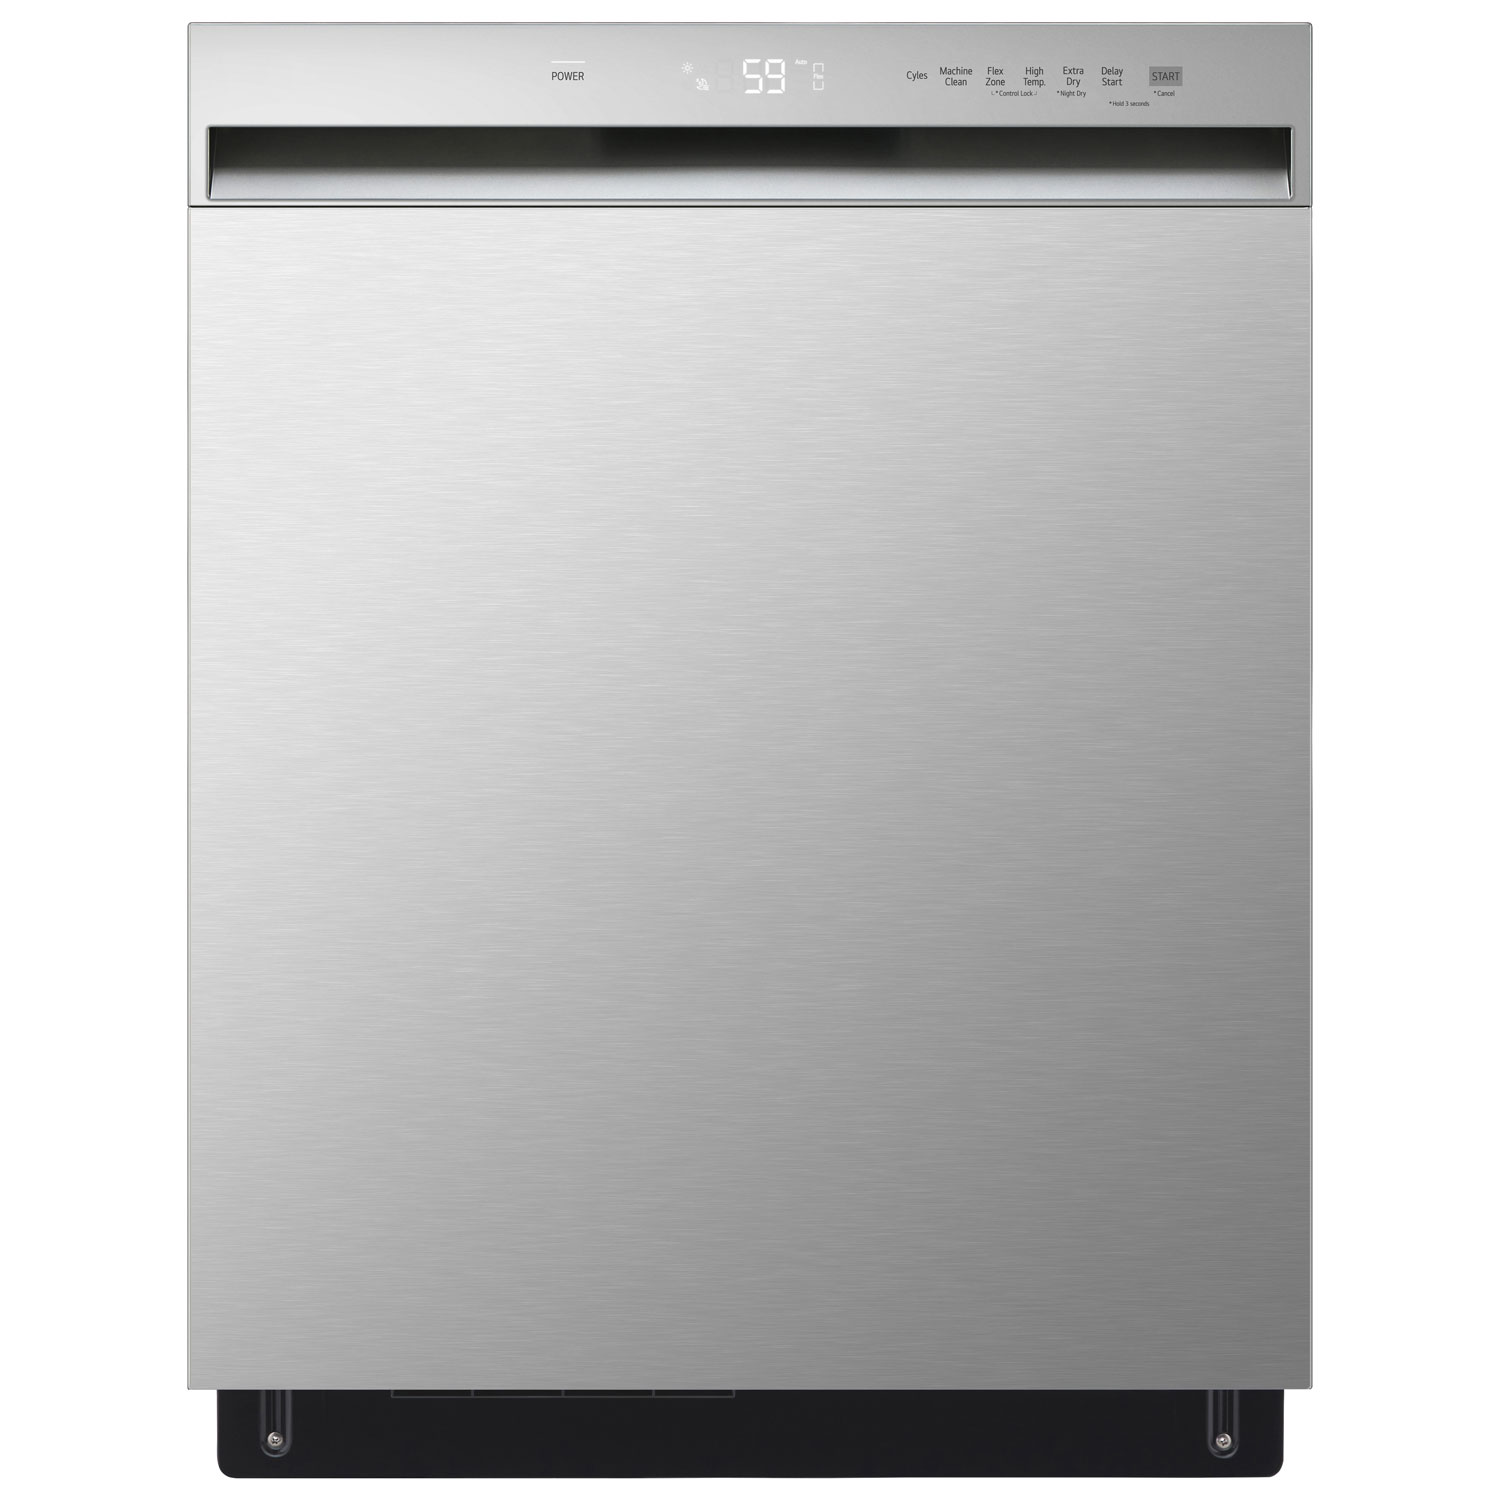 LG 24" 50dB Built-In Dishwasher with Third Rack (LDFC3532S) - Stainless Steel